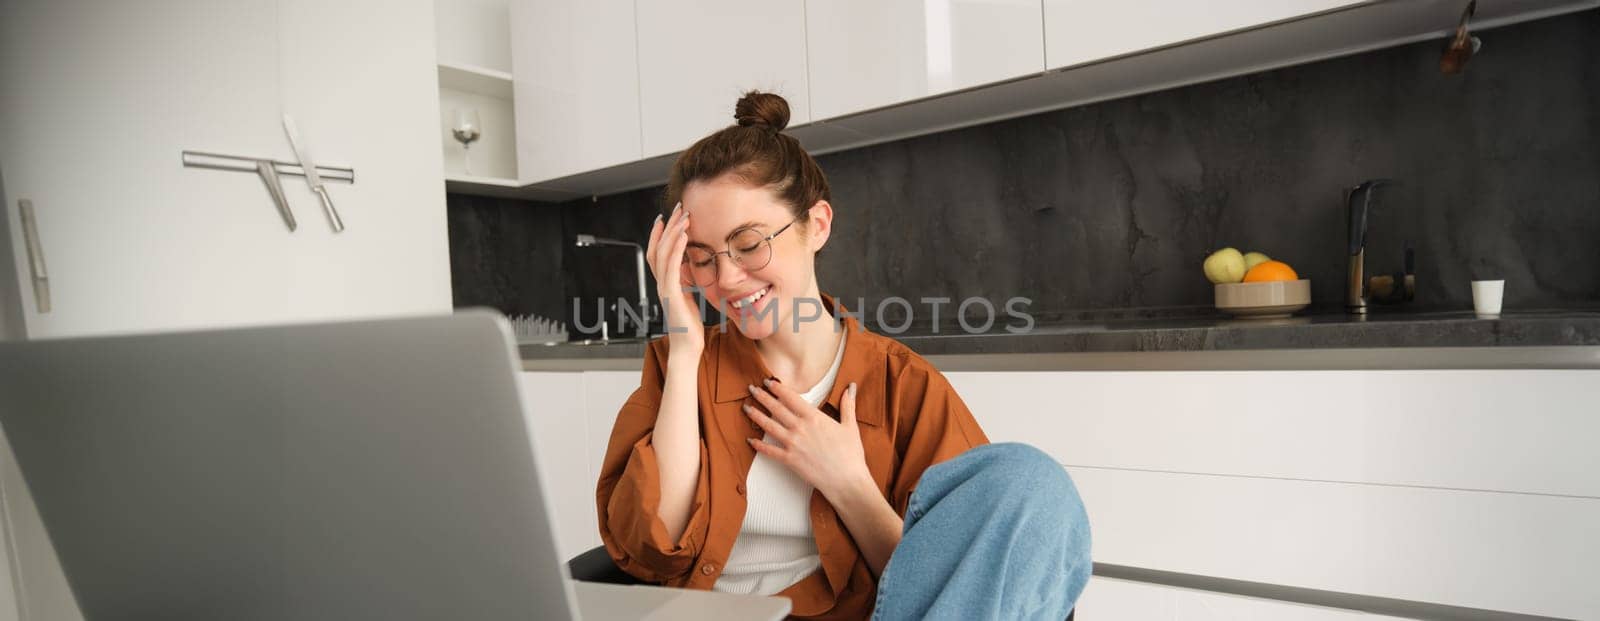 Work from home, remote job concept. Young woman sitting in kitchen, using laptop, joins video chat conversation, give online lessons, talking to client on computer.